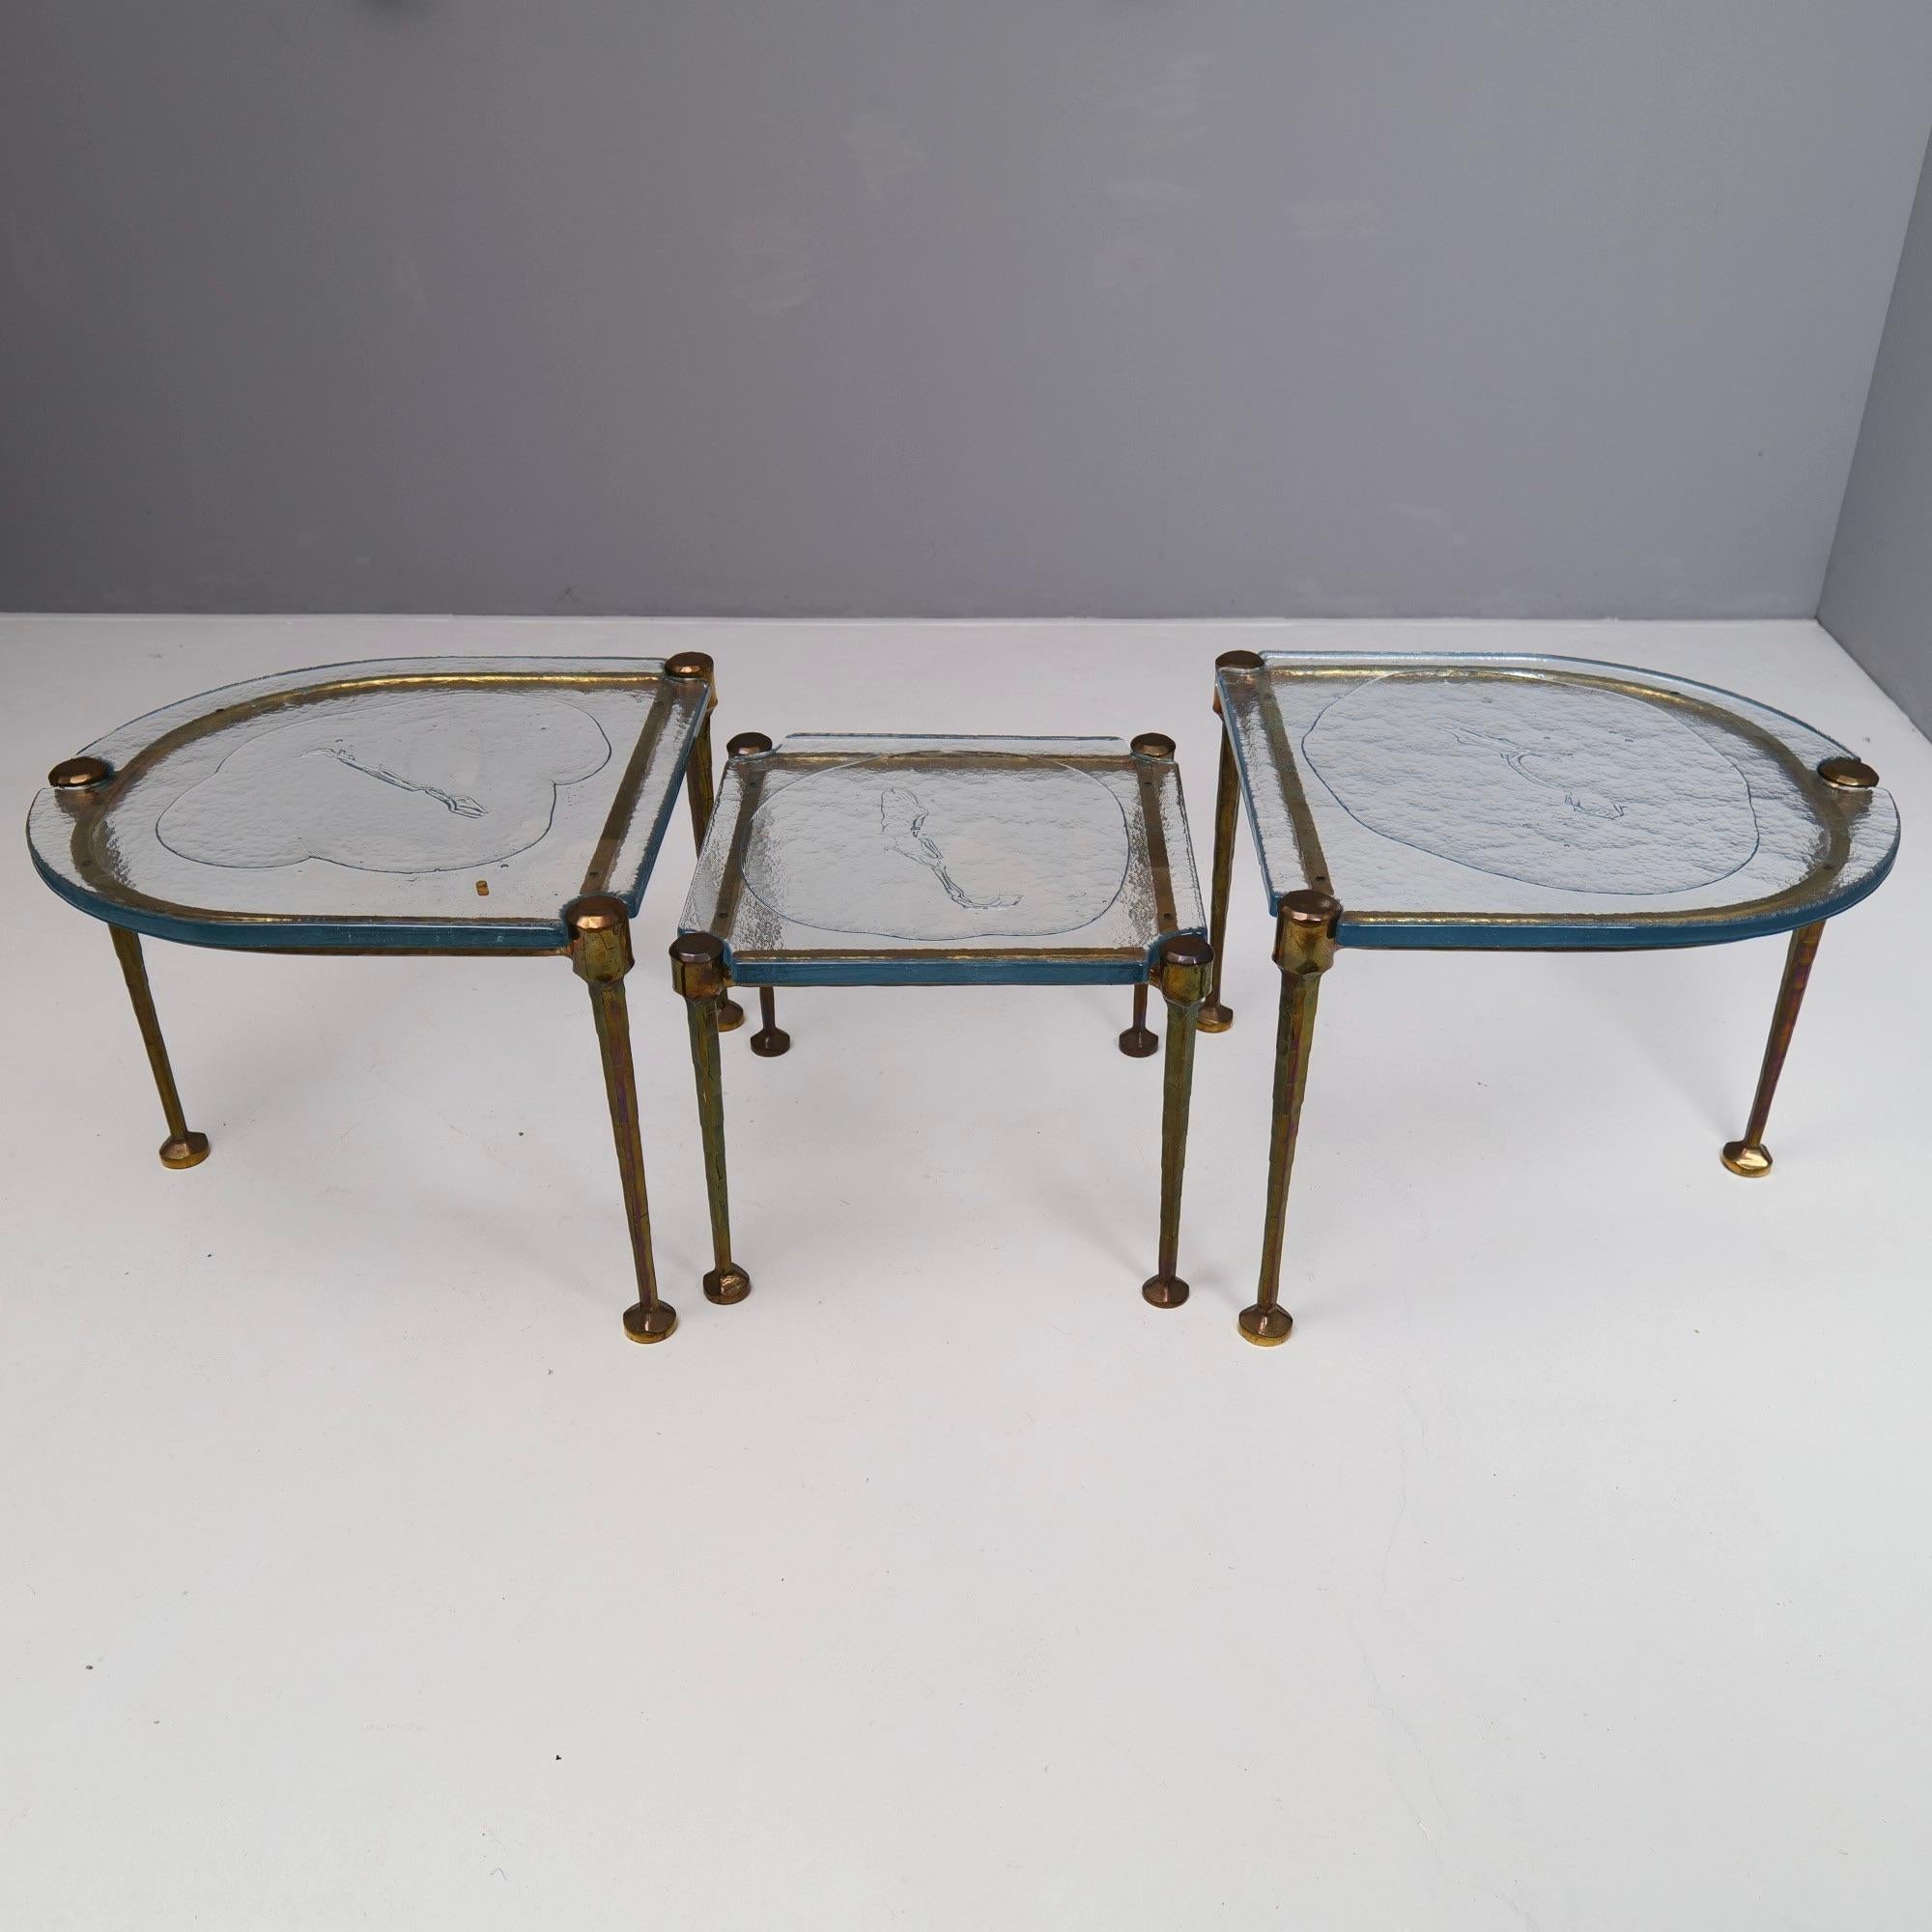 Brutalist tables made of forged bronze and cast glass from the 1980s. 
In modern times, the production of such tables would be impossible for reasons of cost and performance.

3 cm thick crystal glass 
Dimensions:
Center table:
51 cm x 51 cm , 43 cm